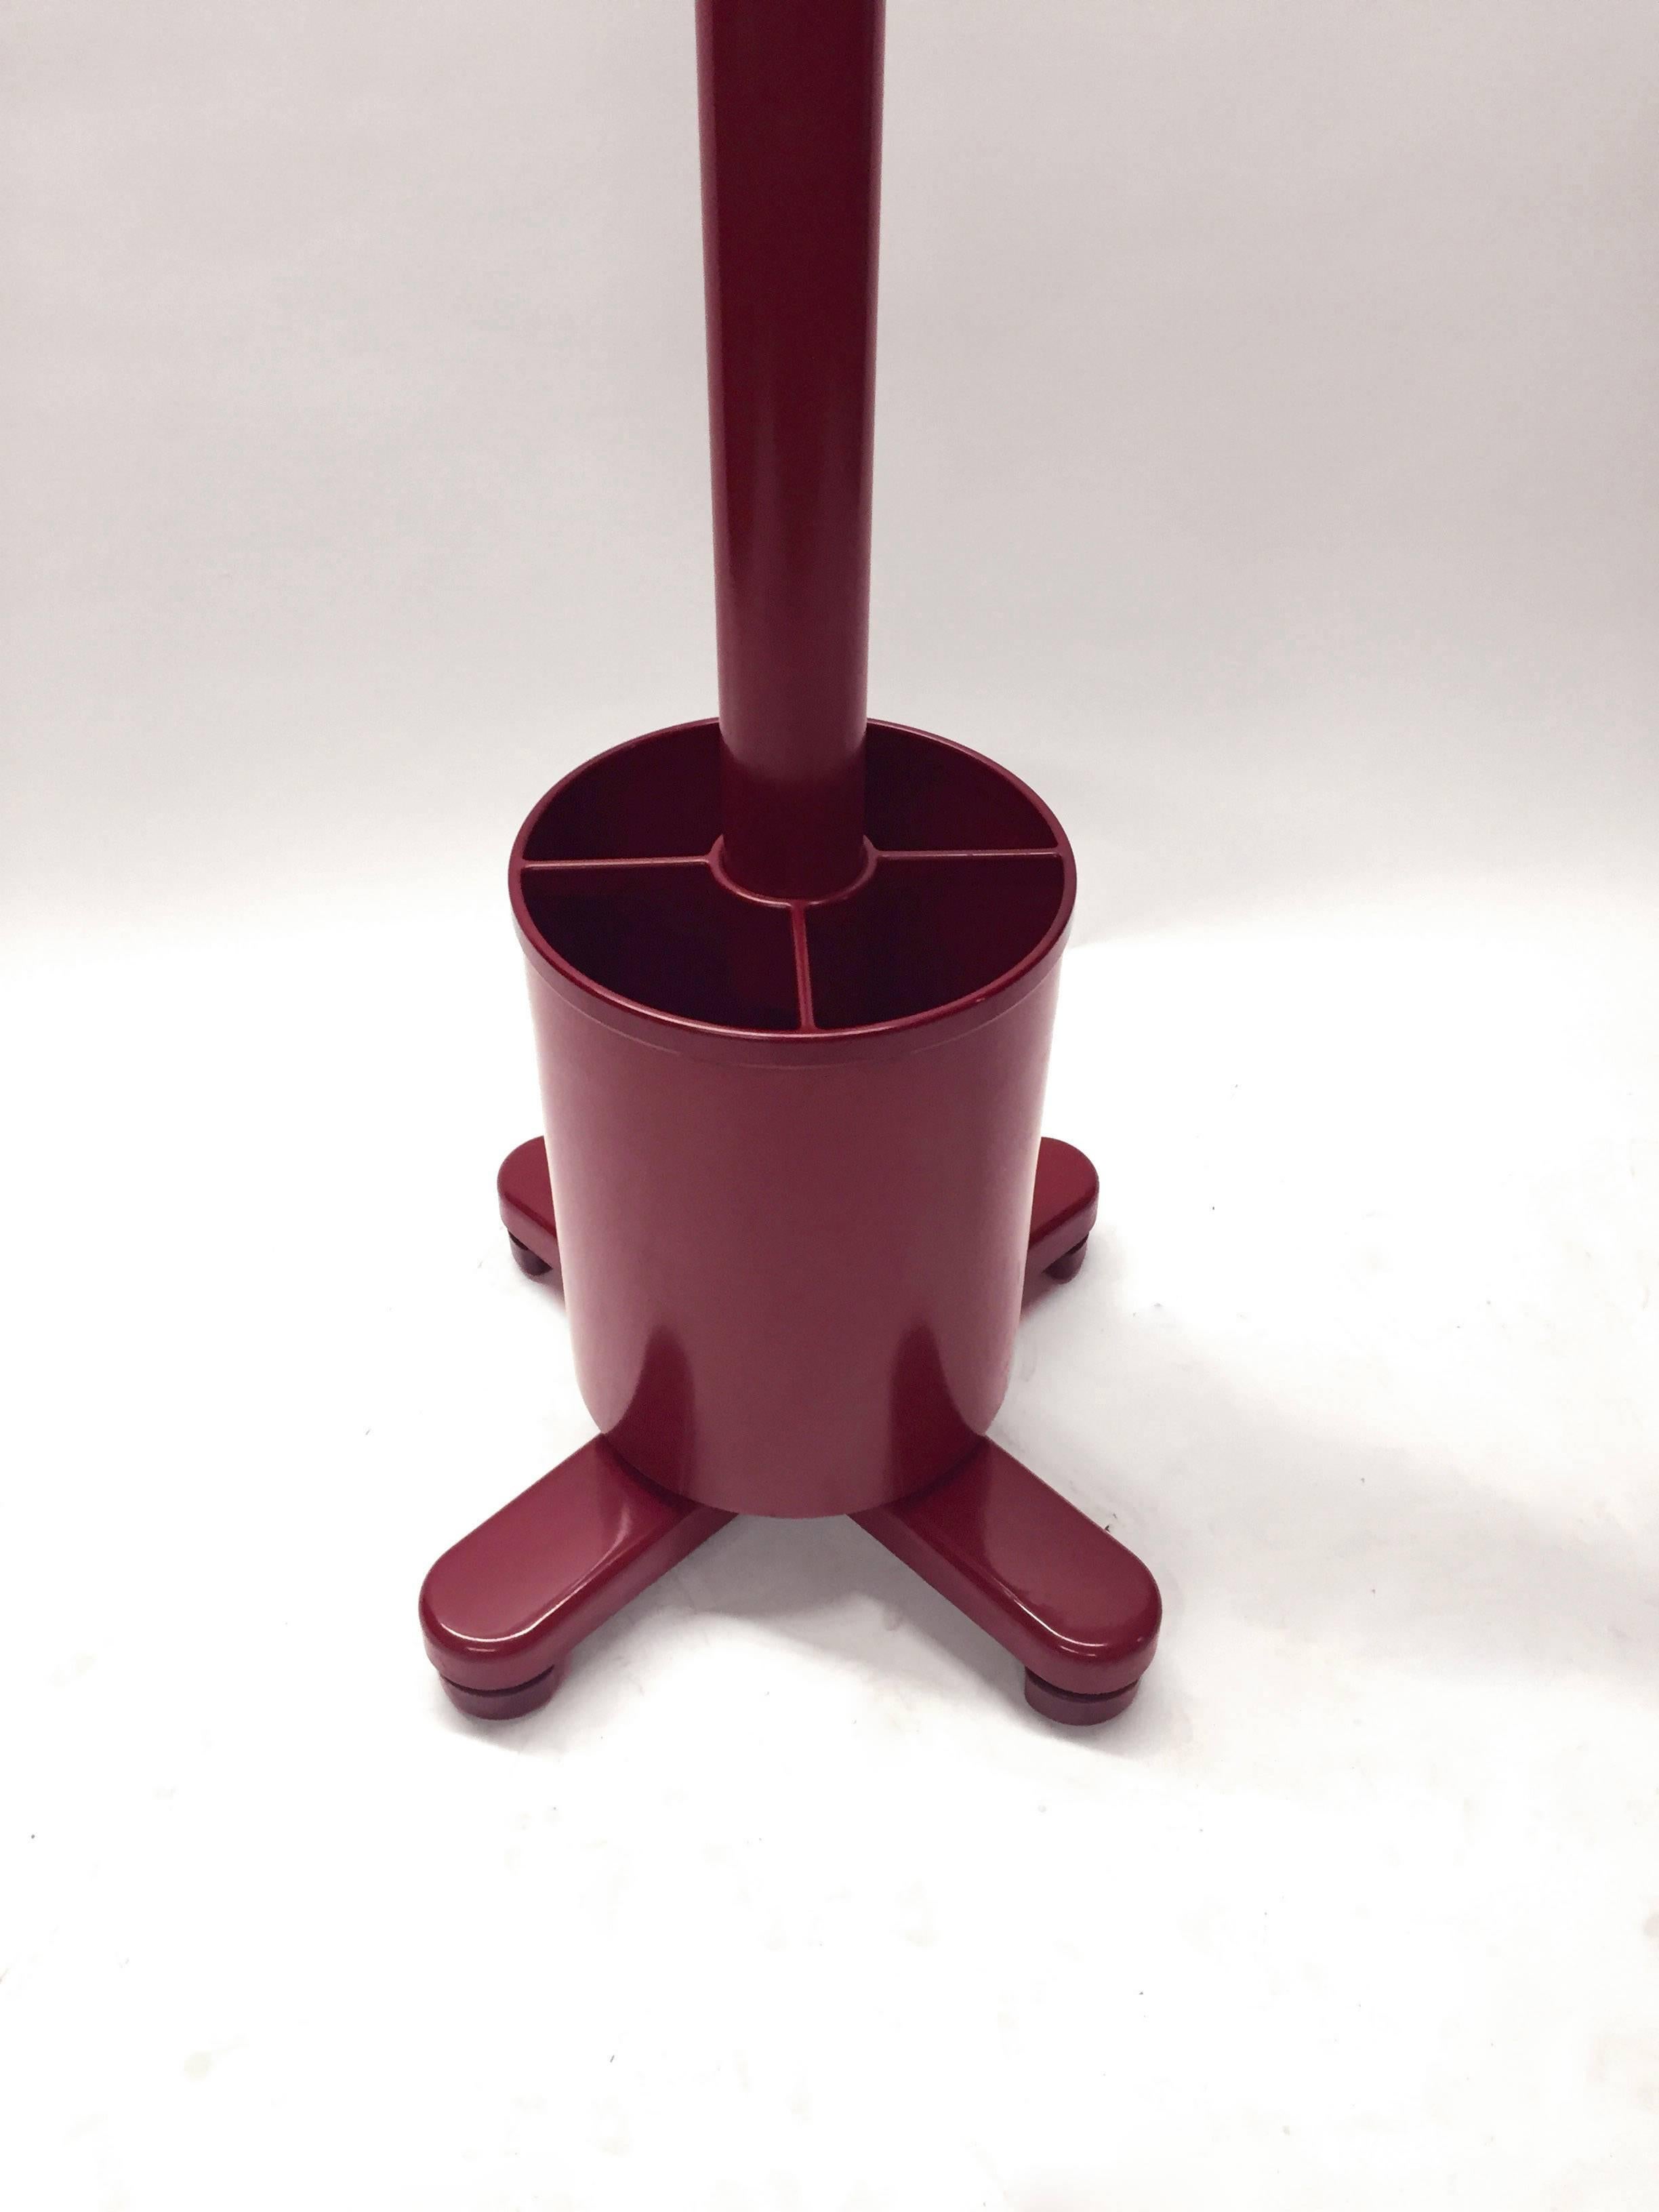 Mid-Century Modern Coat Rack with Umbrella Stand by Ettore Sottsass for Olivetti, circa 1973, Italy